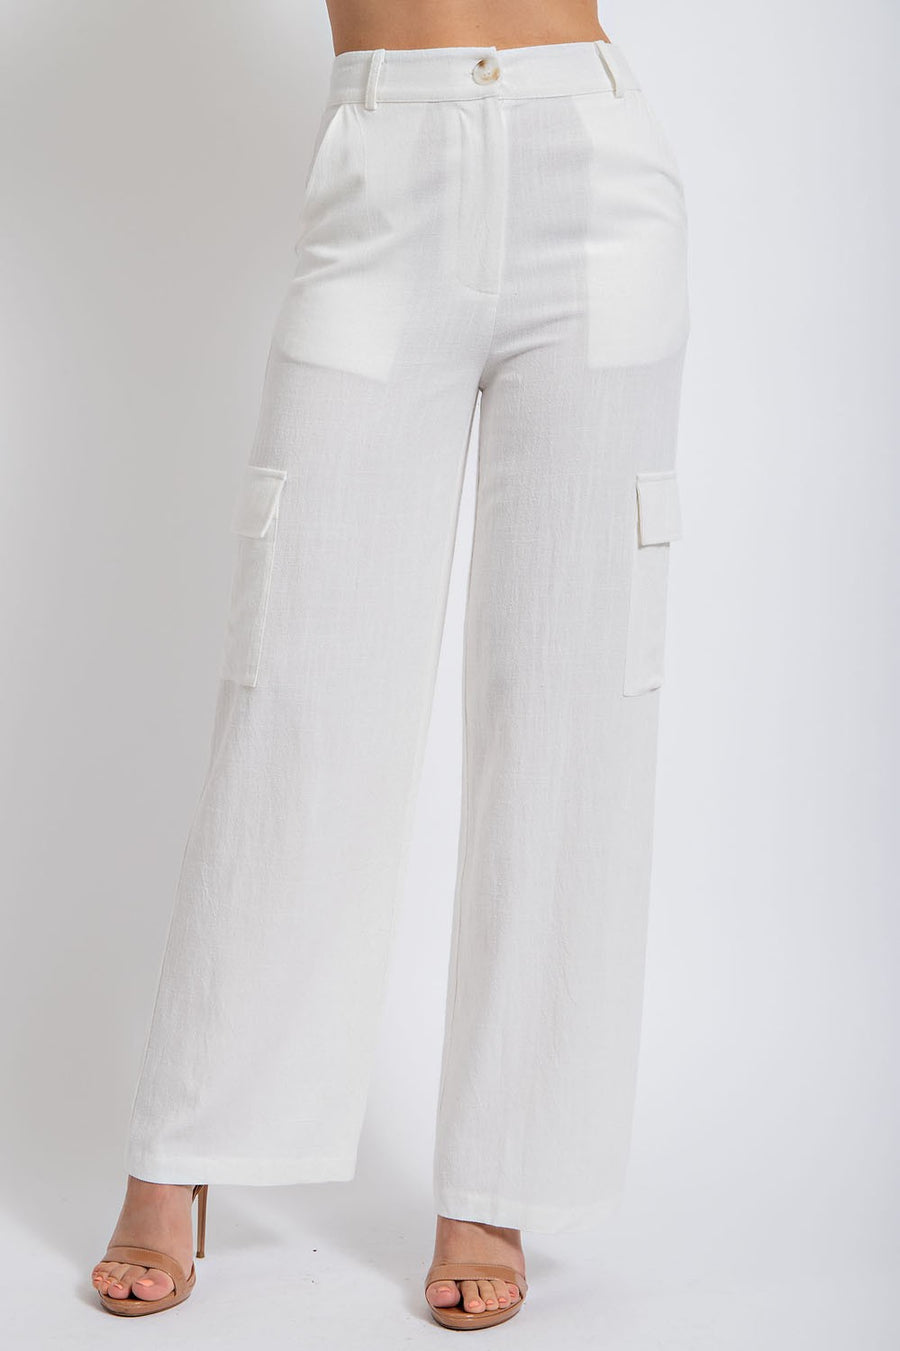 Linen pants with pockets. 